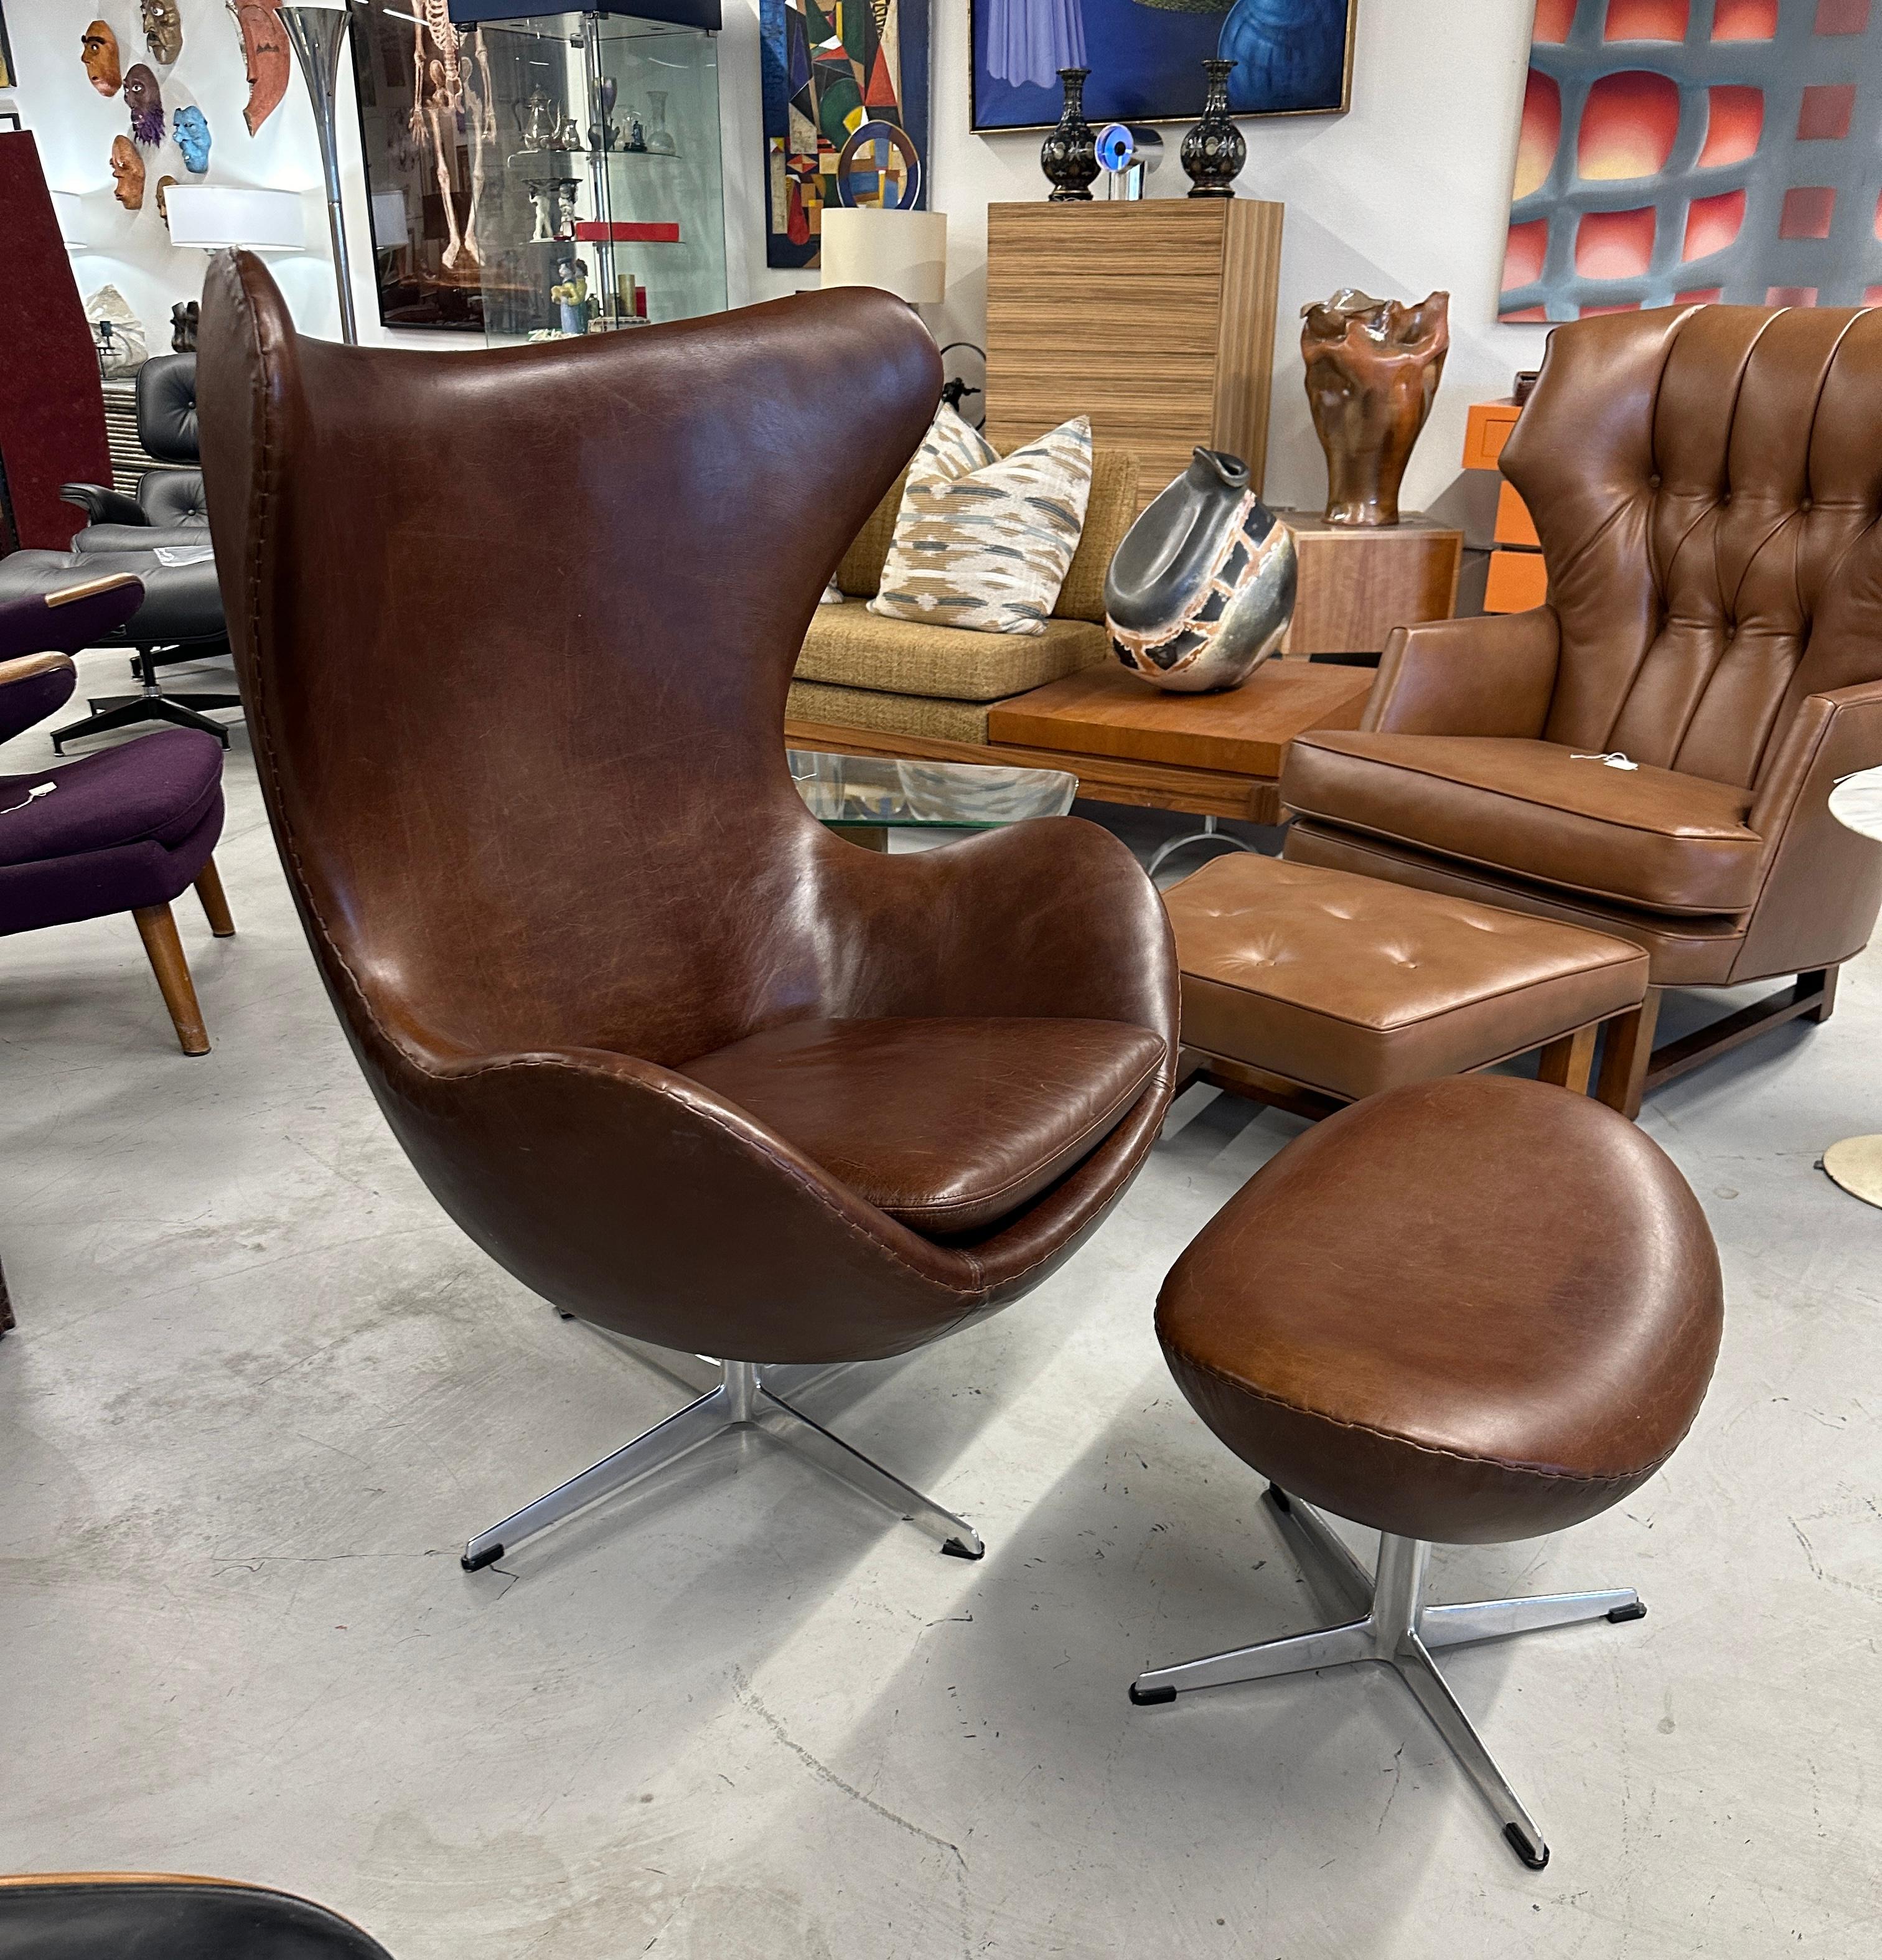 A beautiful brown leather Egg chair designed by Arne Jacobsen and produced by Fritz Hansen of Denmark. This example is from a wonderful Palm Springs estate and bears a Fritz Hansen label with the date code 0865 which dates it to 1965. The matching